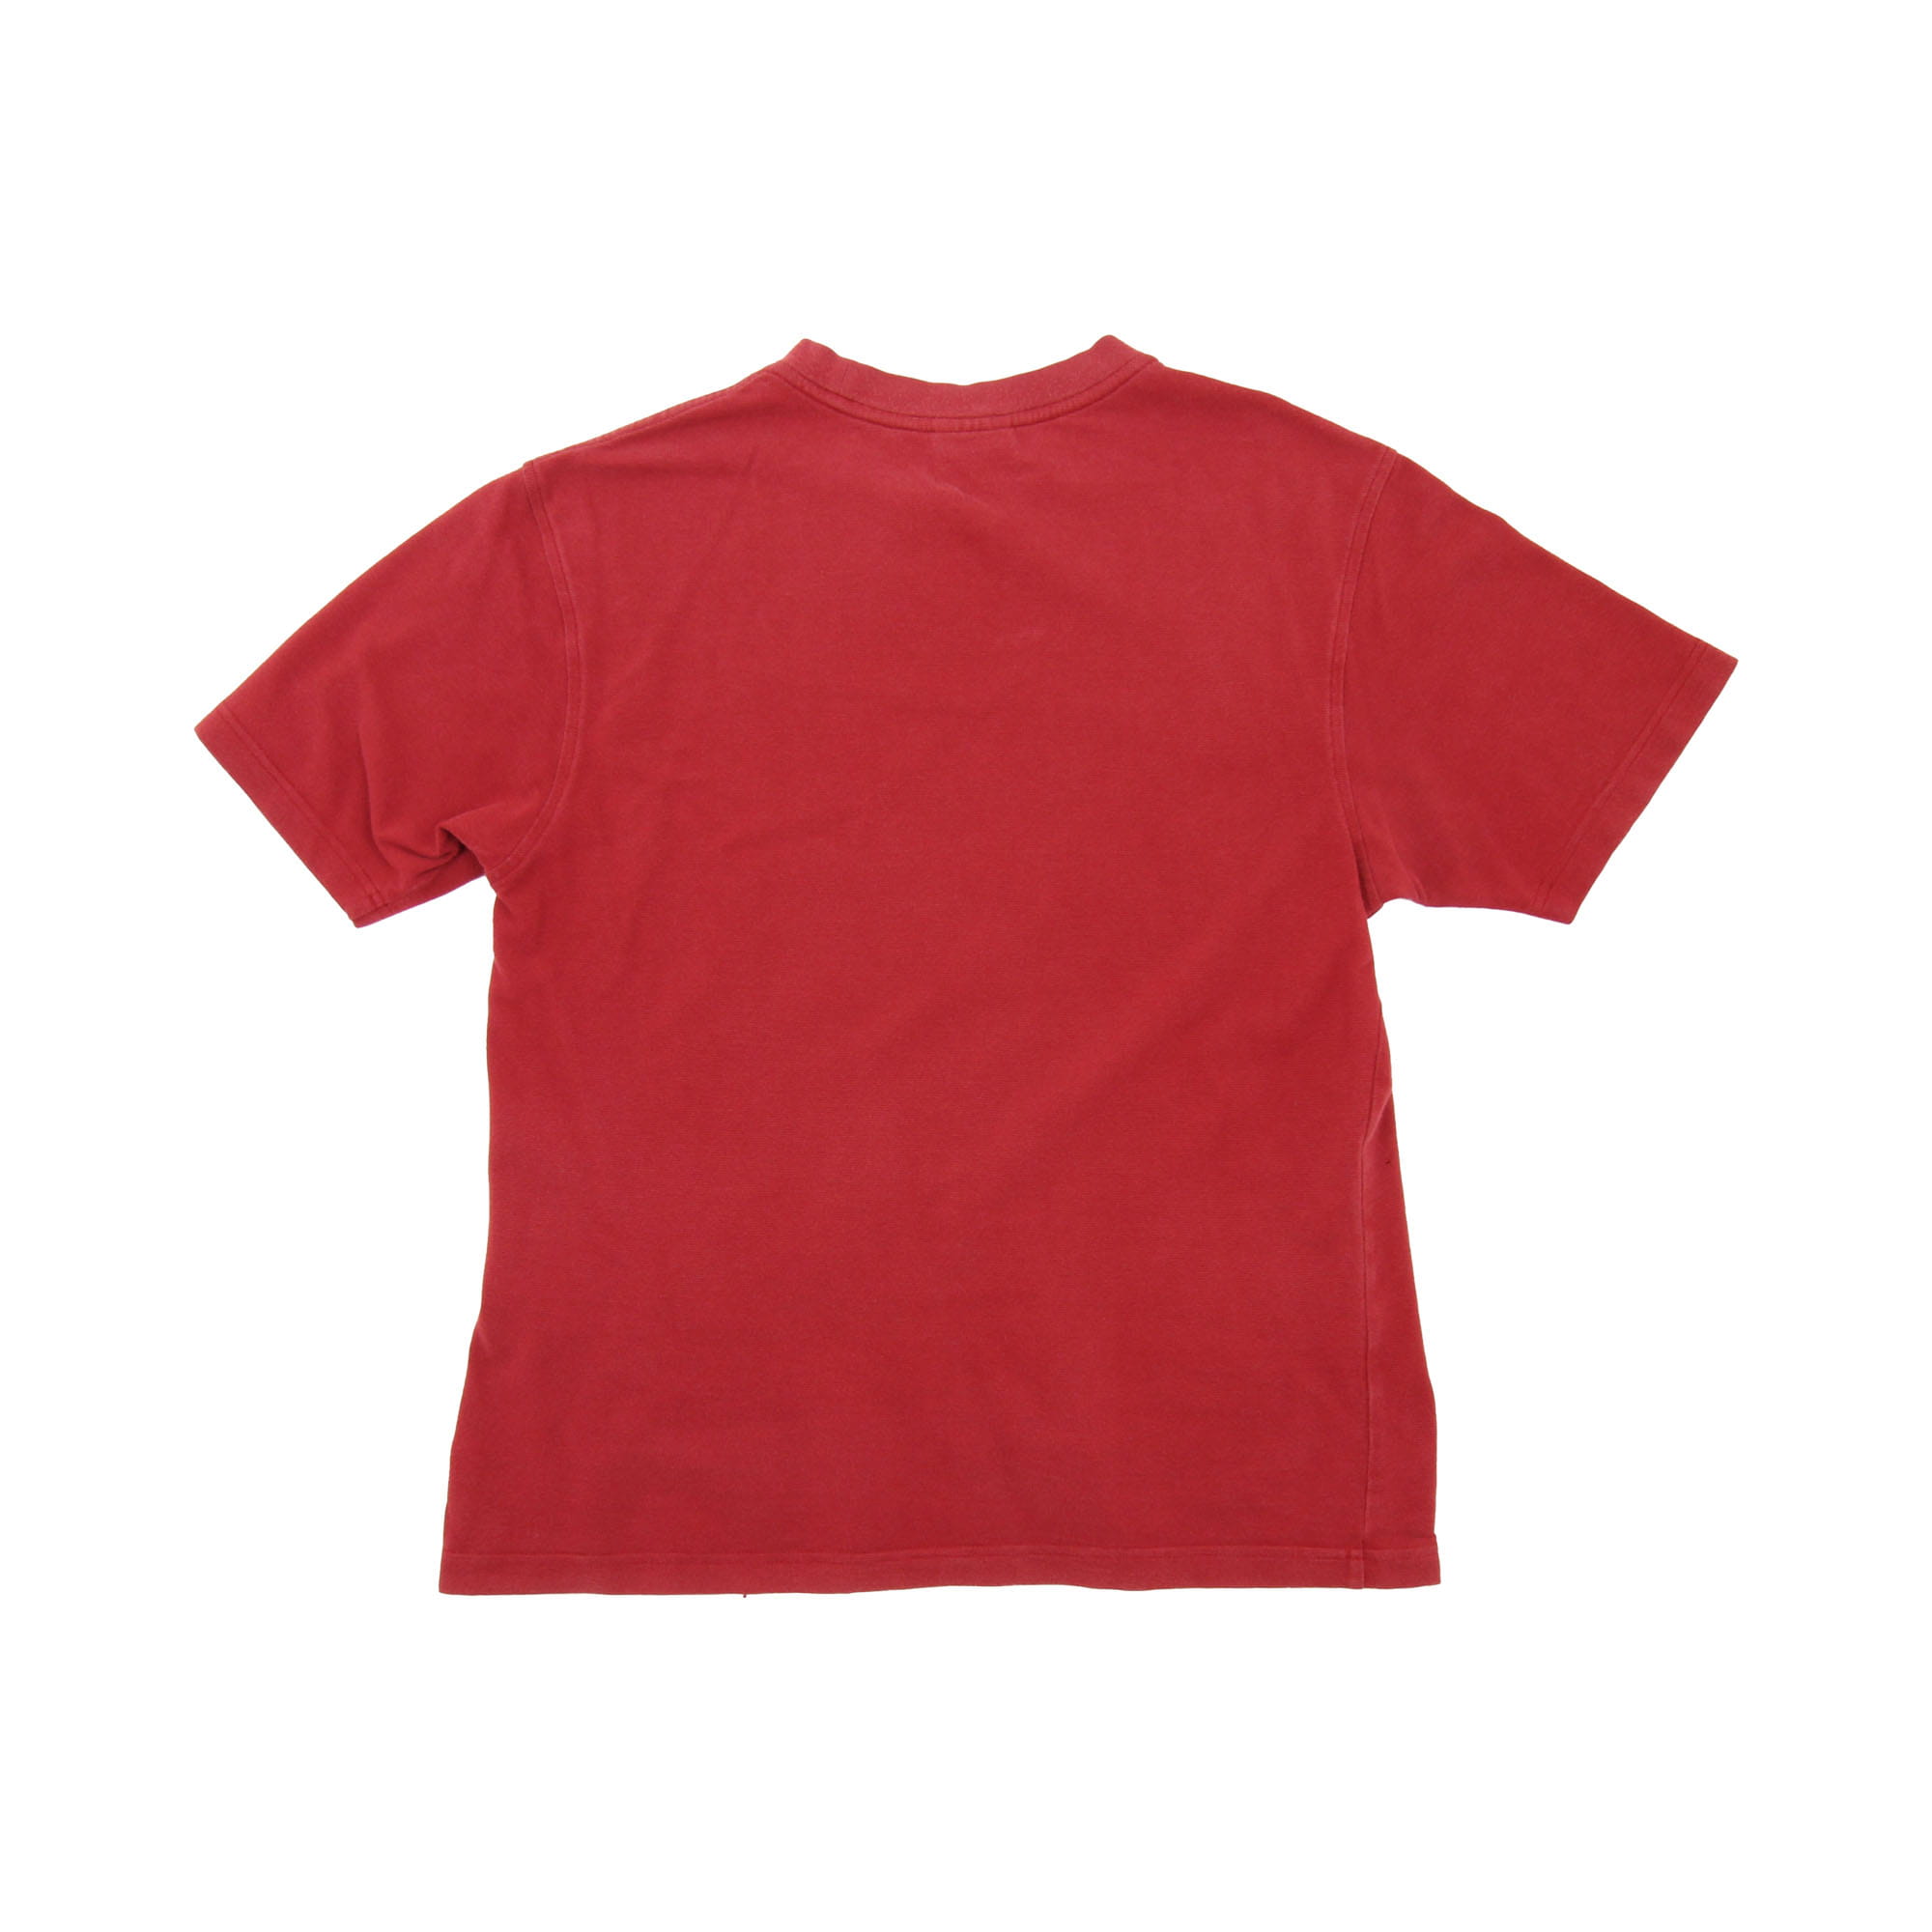 Lacoste T-Shirt Red -  S